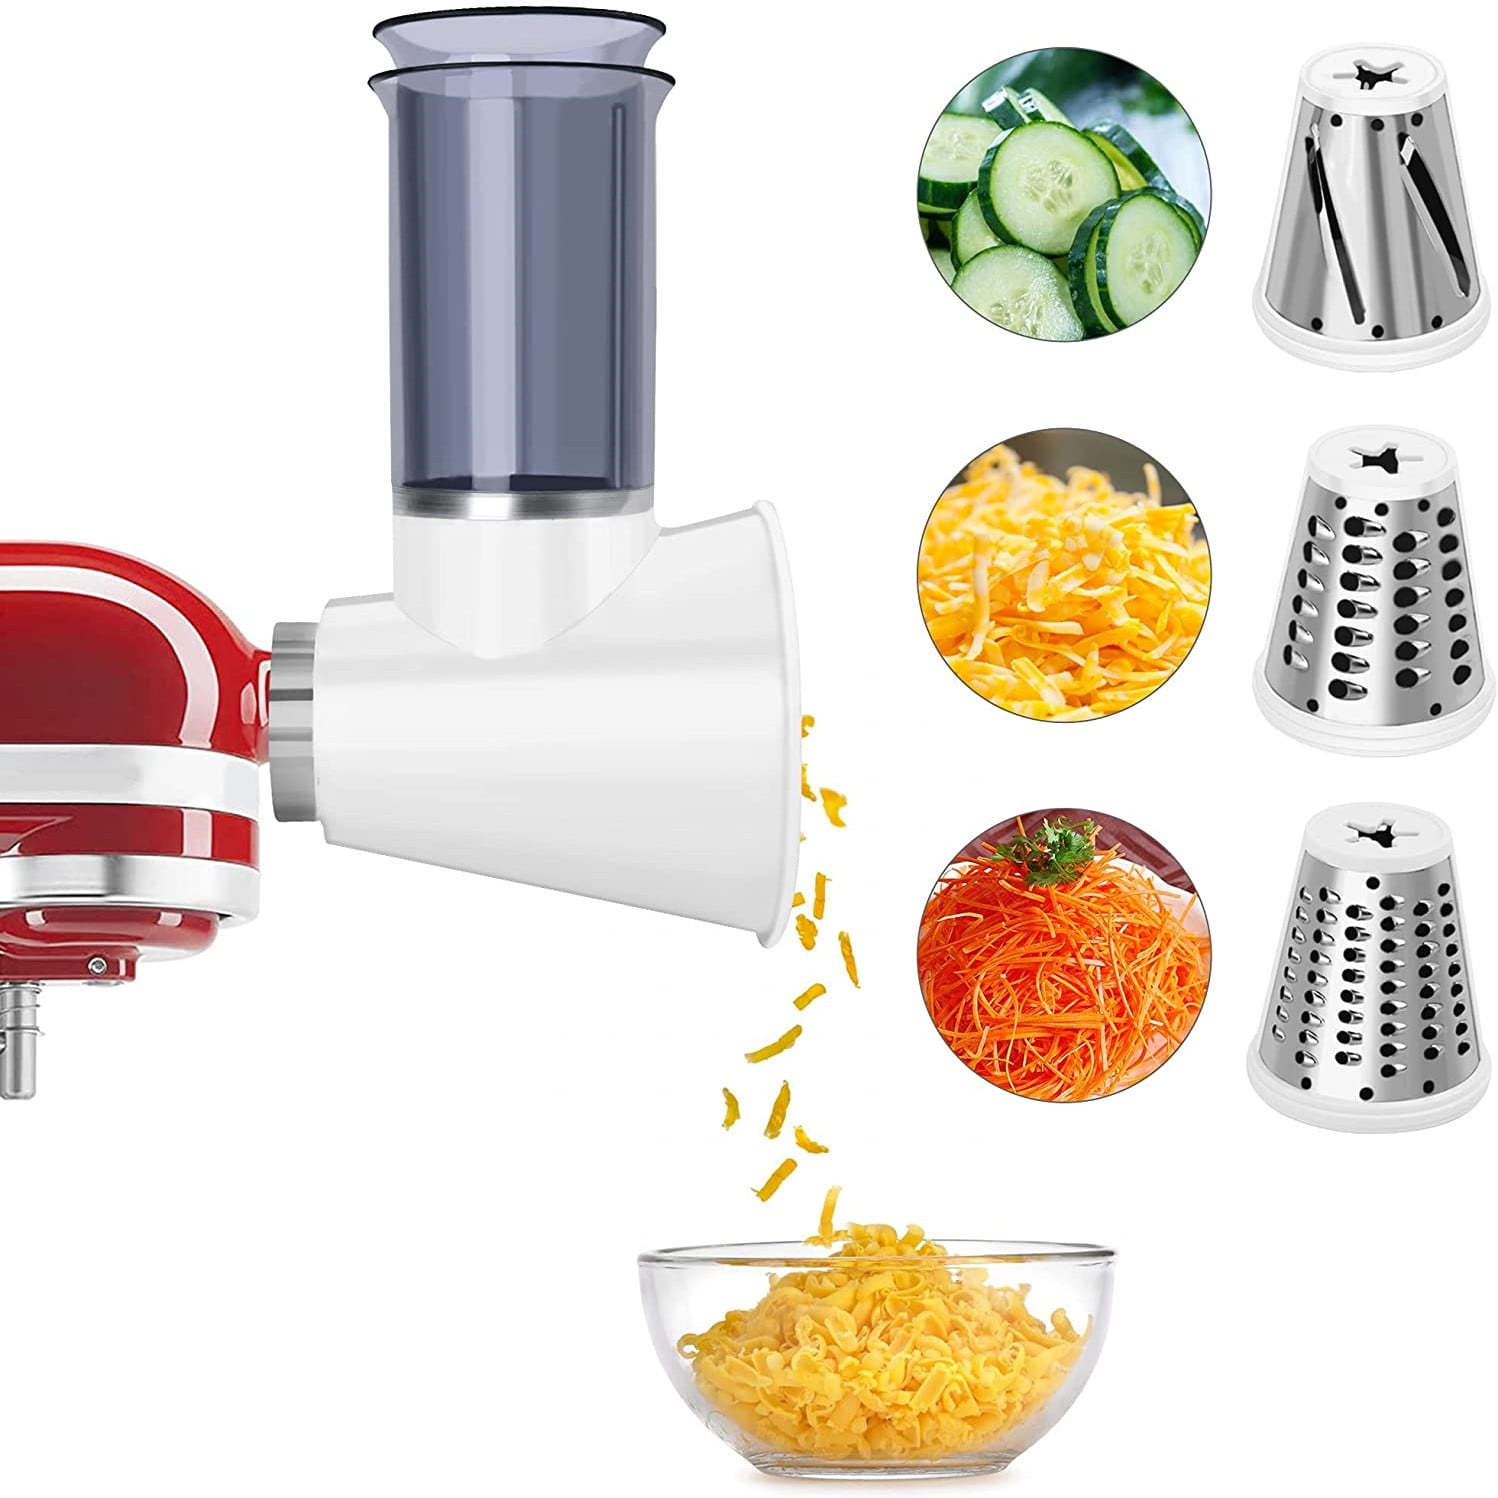 Cheese Grater Attachment Upgrade Slicer or Shredder Attachments for KitchenAid Stand Mixer,Vegetable Chopper Attachment Salad Maker 